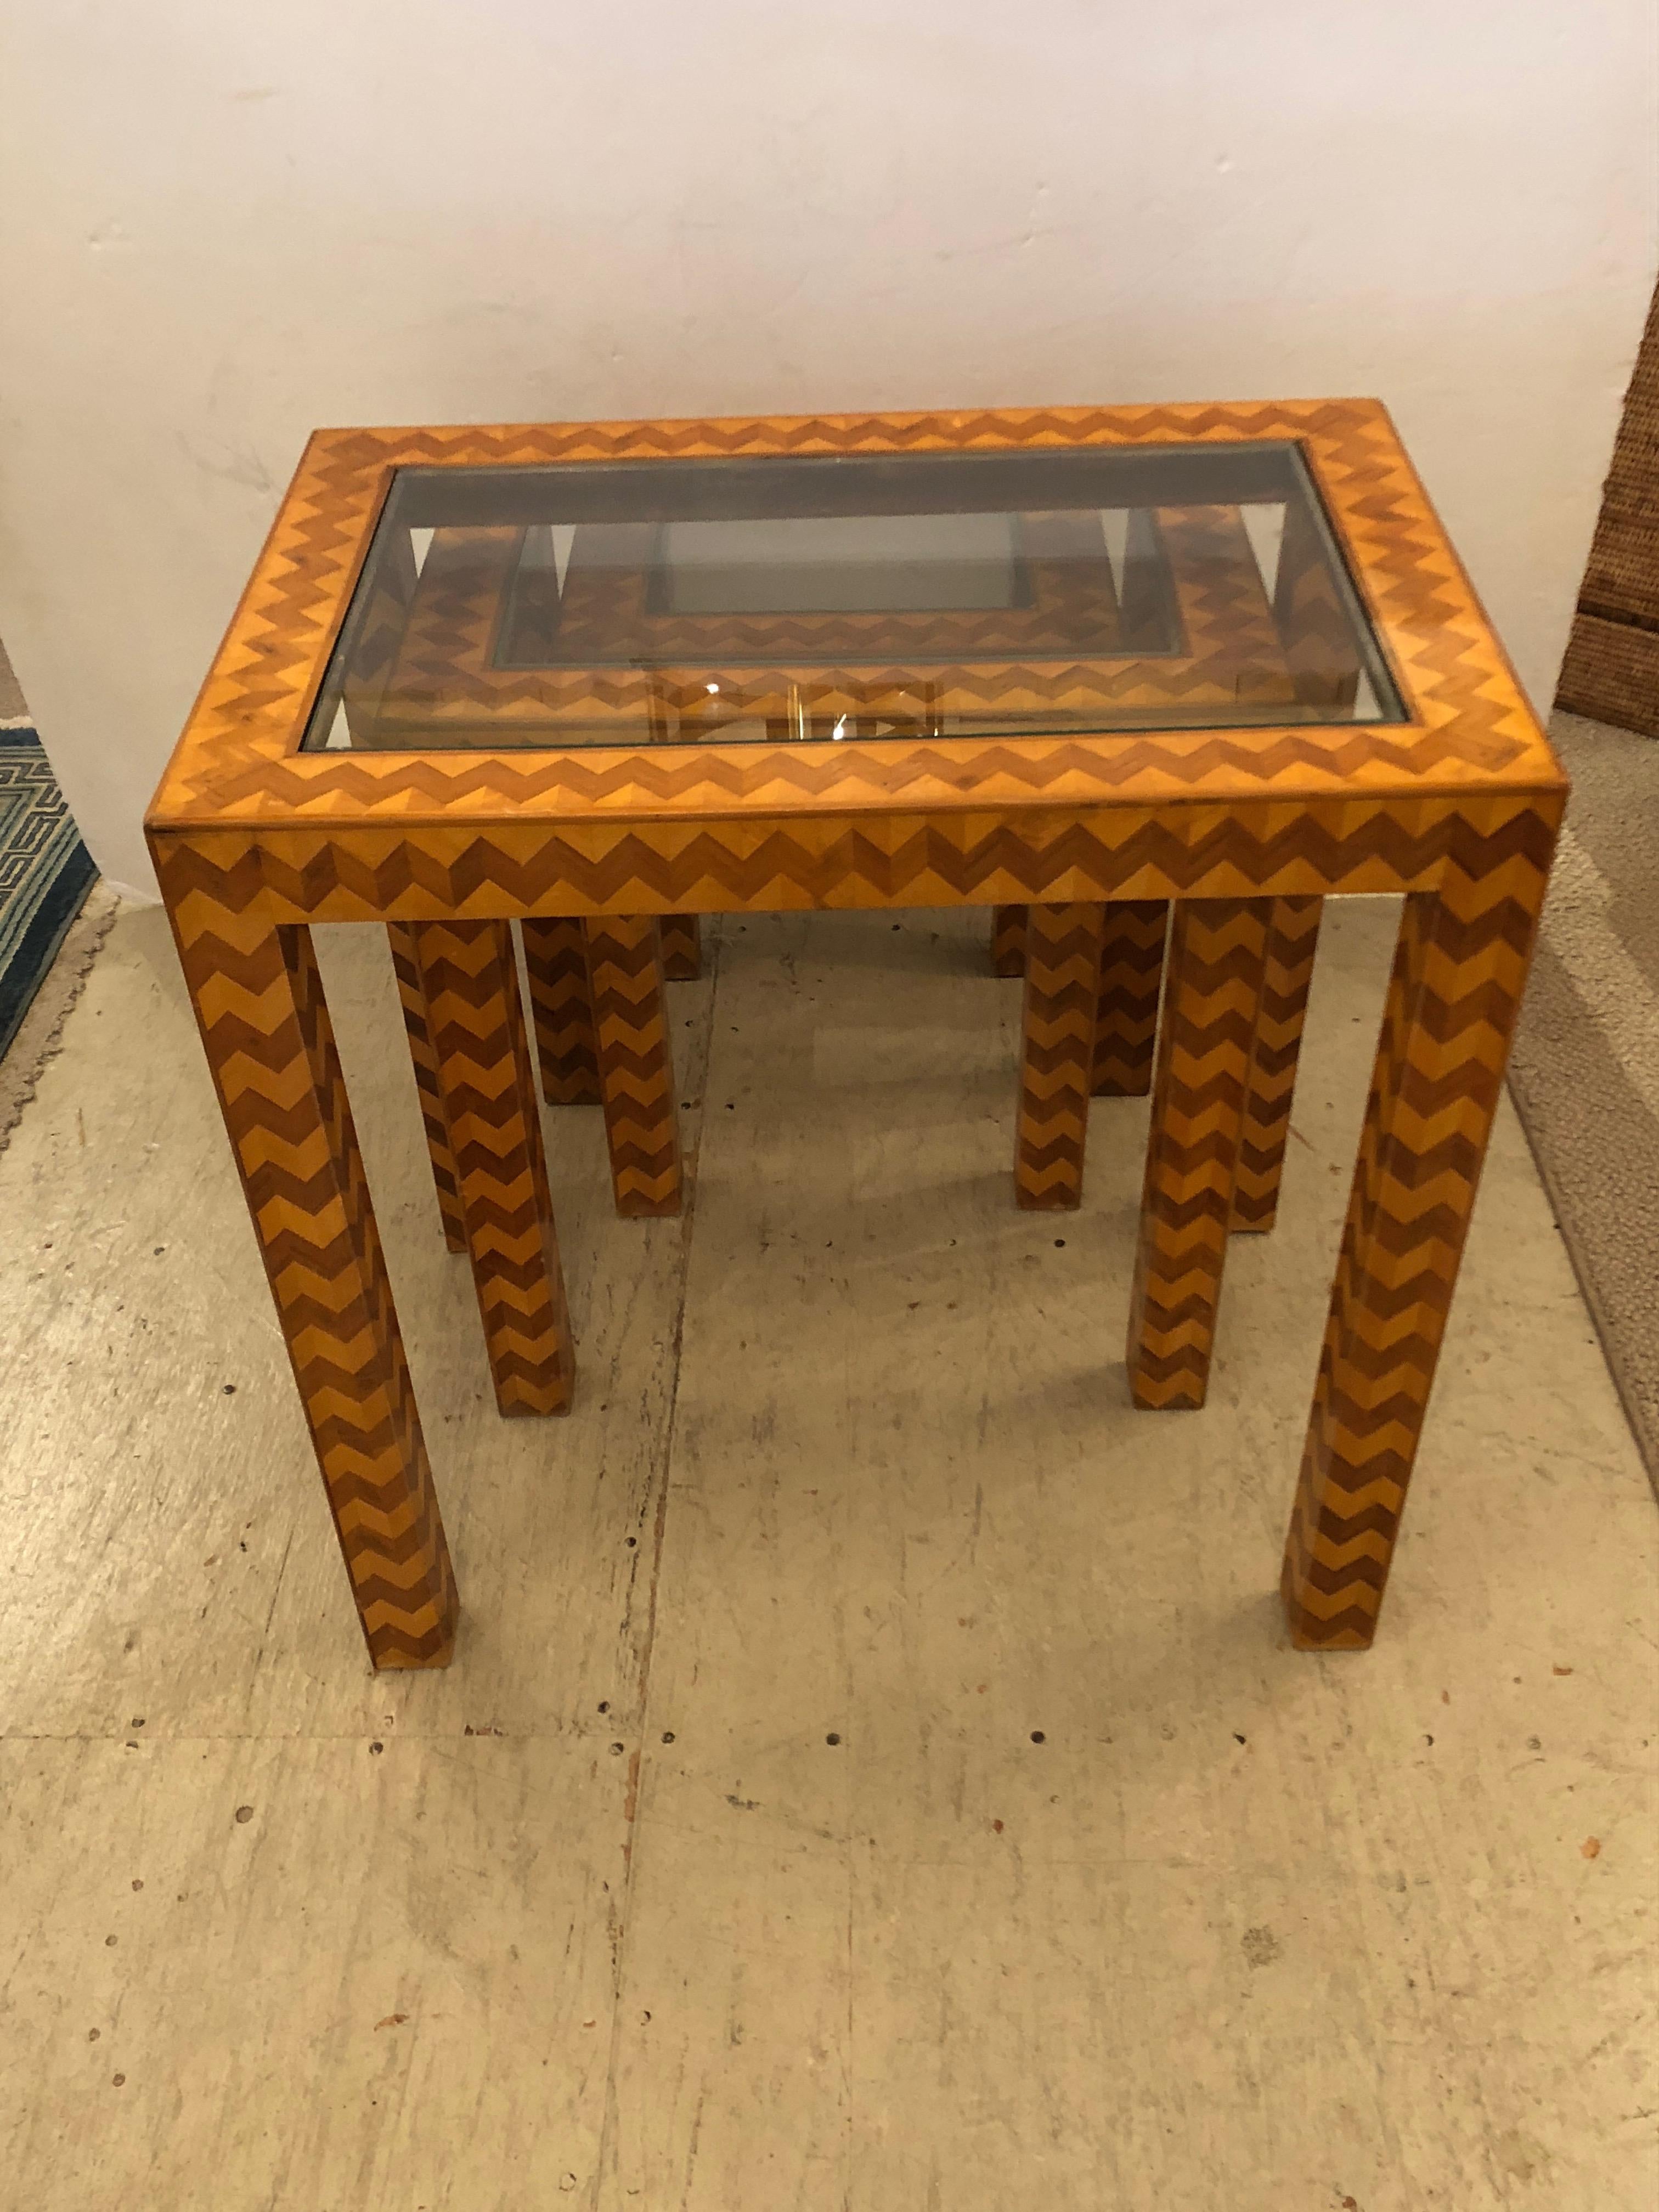 Sensational Trio of Italian Zig Zag Marquetry Mid-Century Modern Nesting Tables In Excellent Condition For Sale In Hopewell, NJ